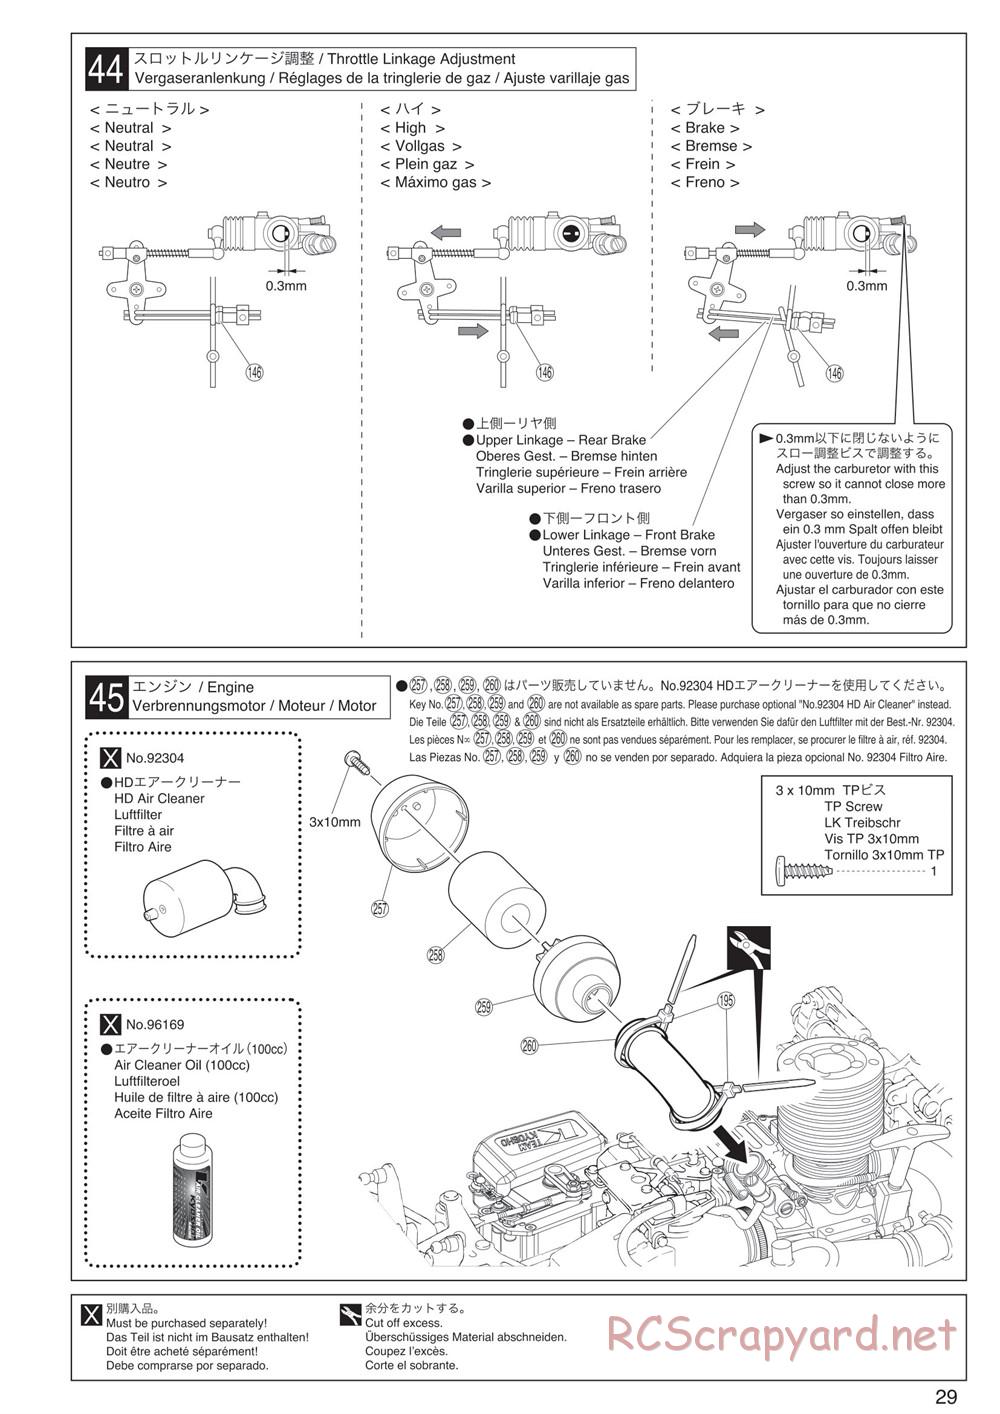 Kyosho - Inferno Neo ST 3.0 - Manual - Page 29